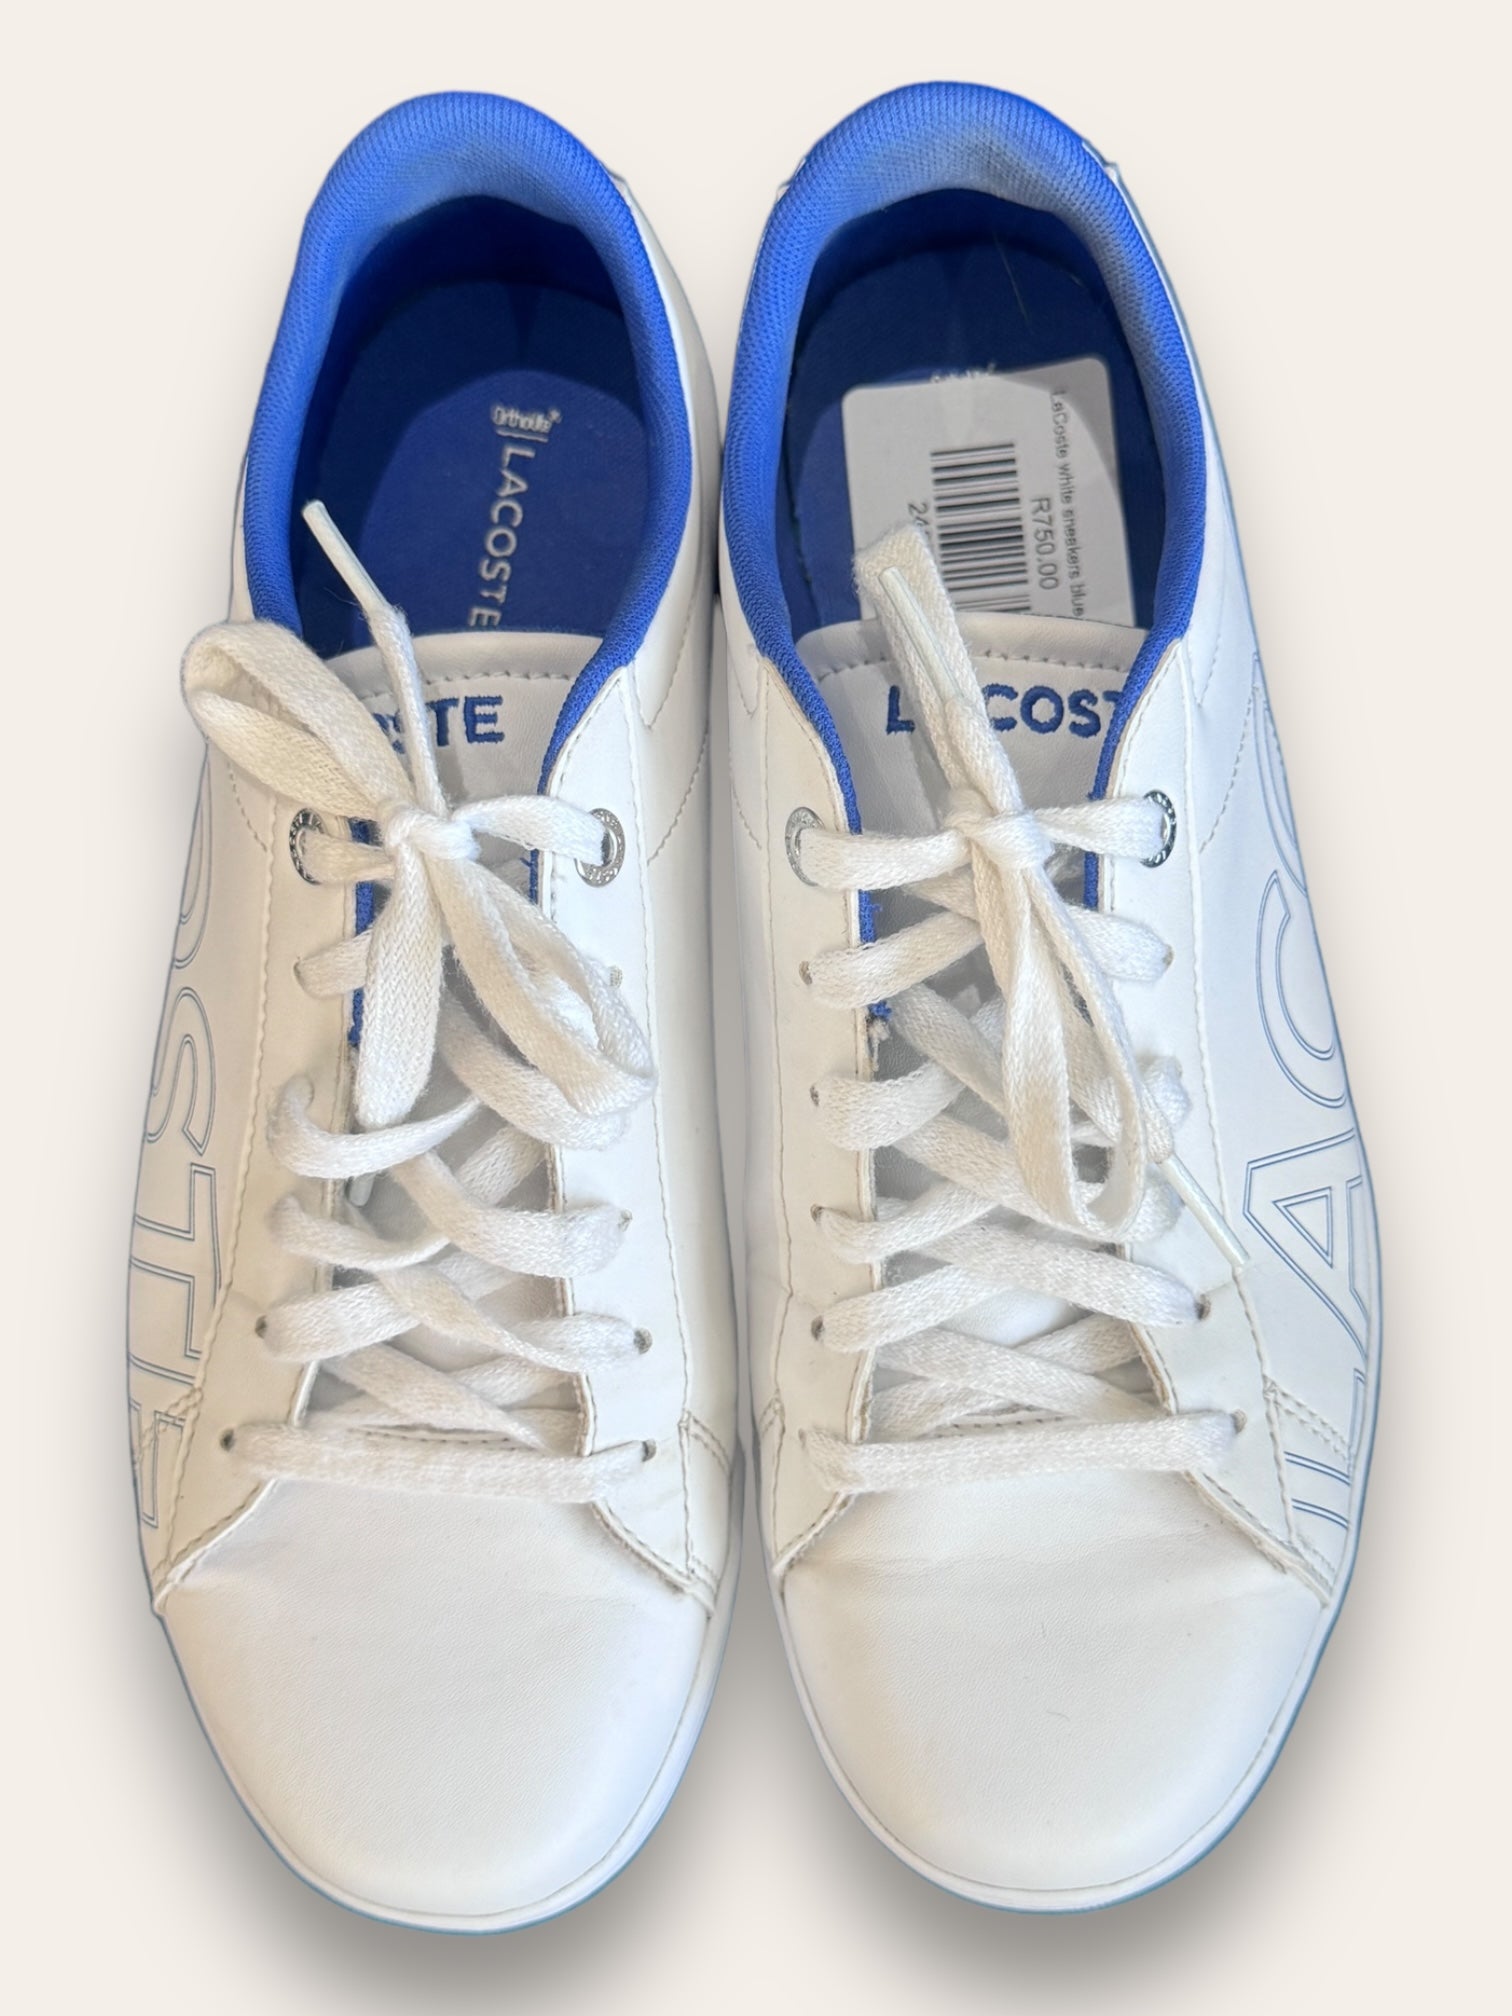 LaCoste white sneakers blue writing 5